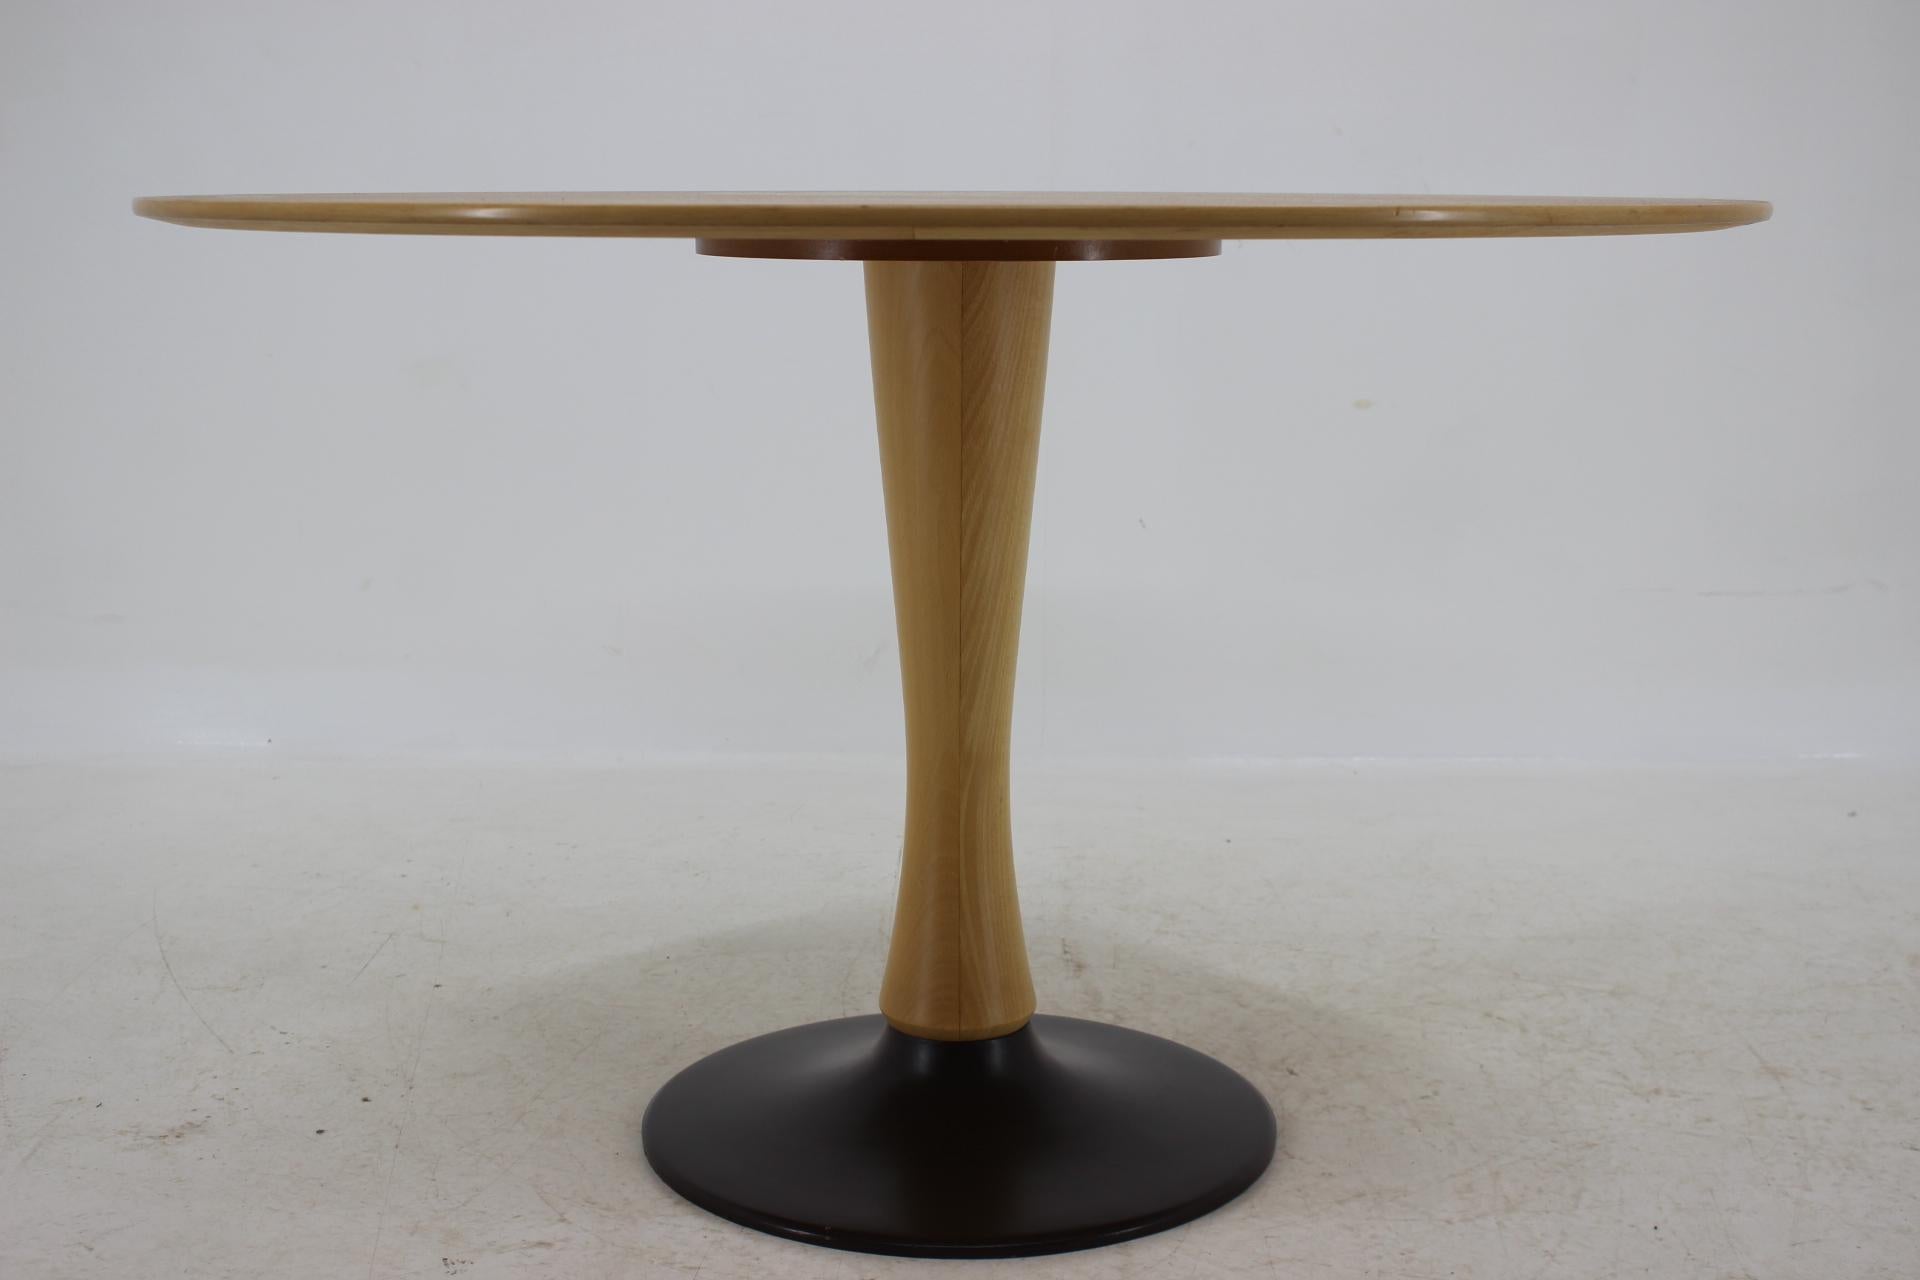 - Made in Czechoslovakia
- Made of beech and veneer
- The table is Stabil
- Good condition.